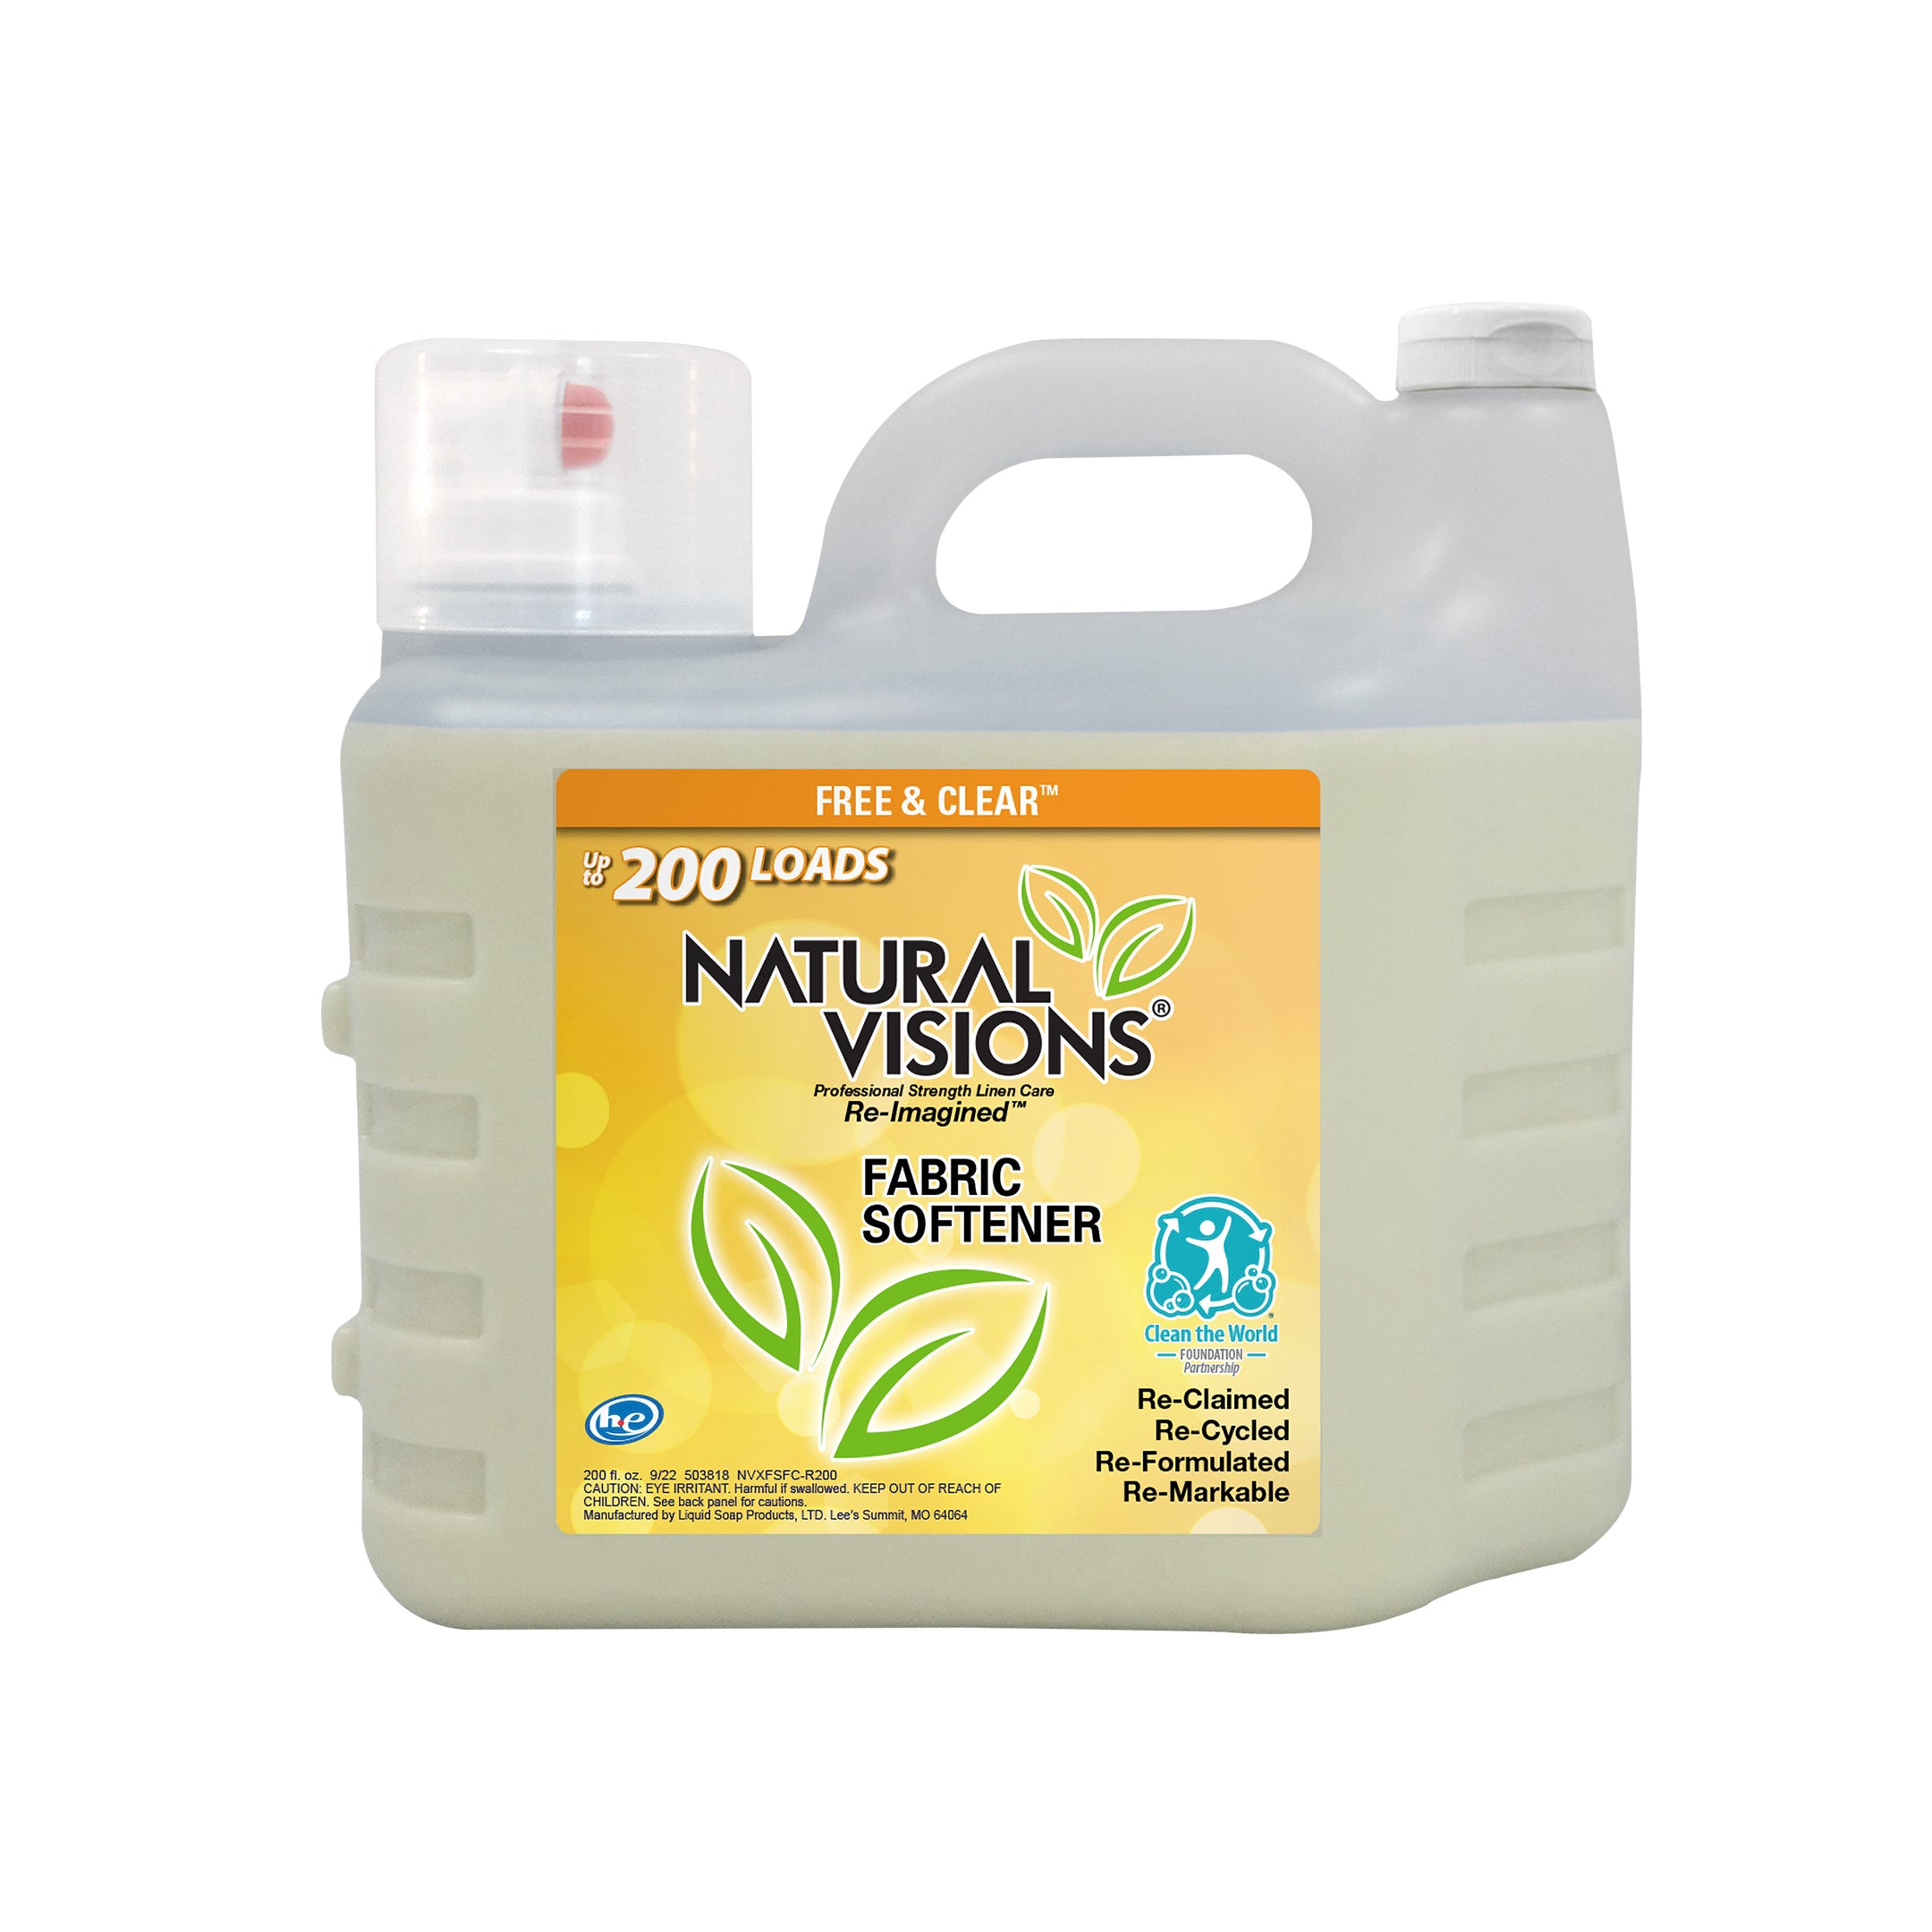 Natural Visions Free & Clear Fabric Softener - 200oz/2pk